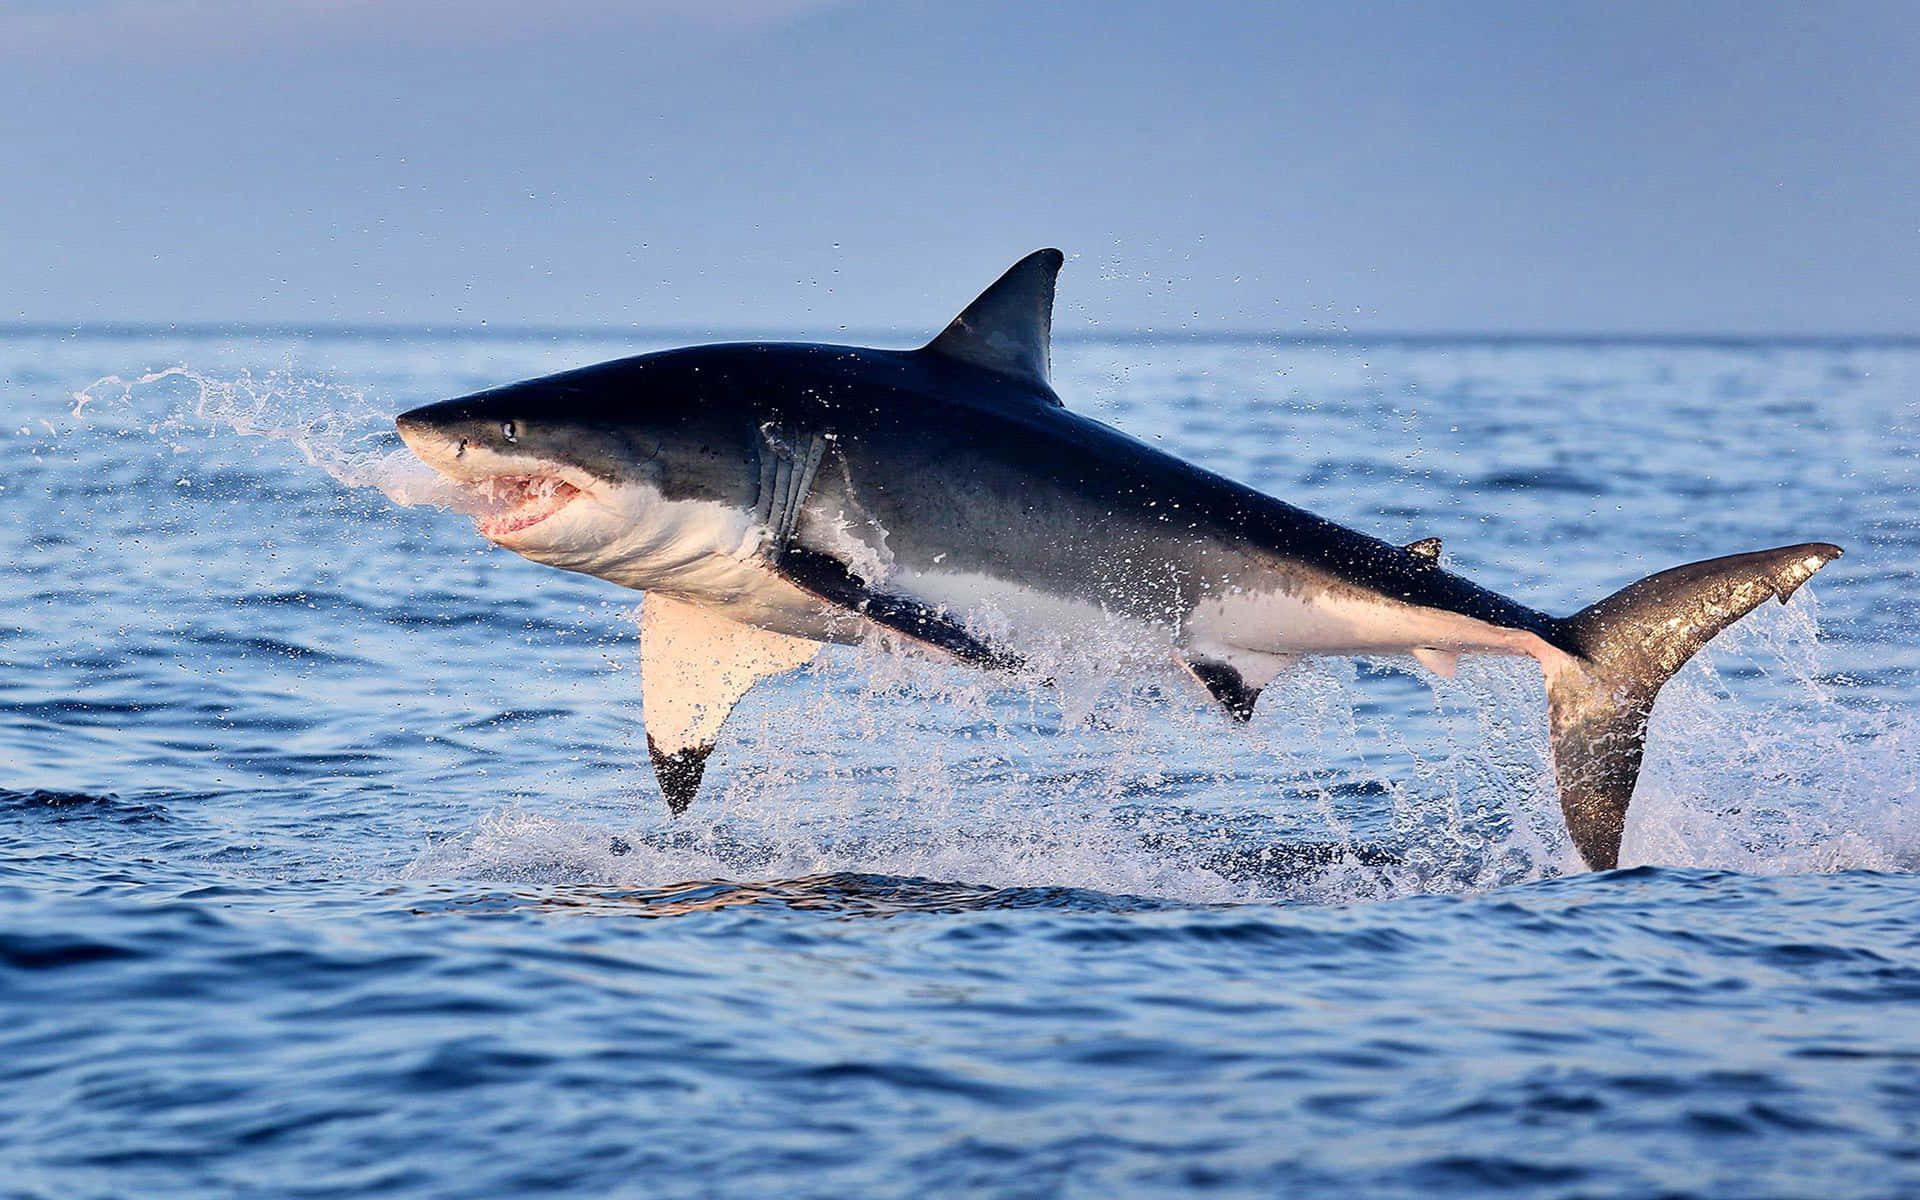 A Great White Shark photographed off the coast of South Africa